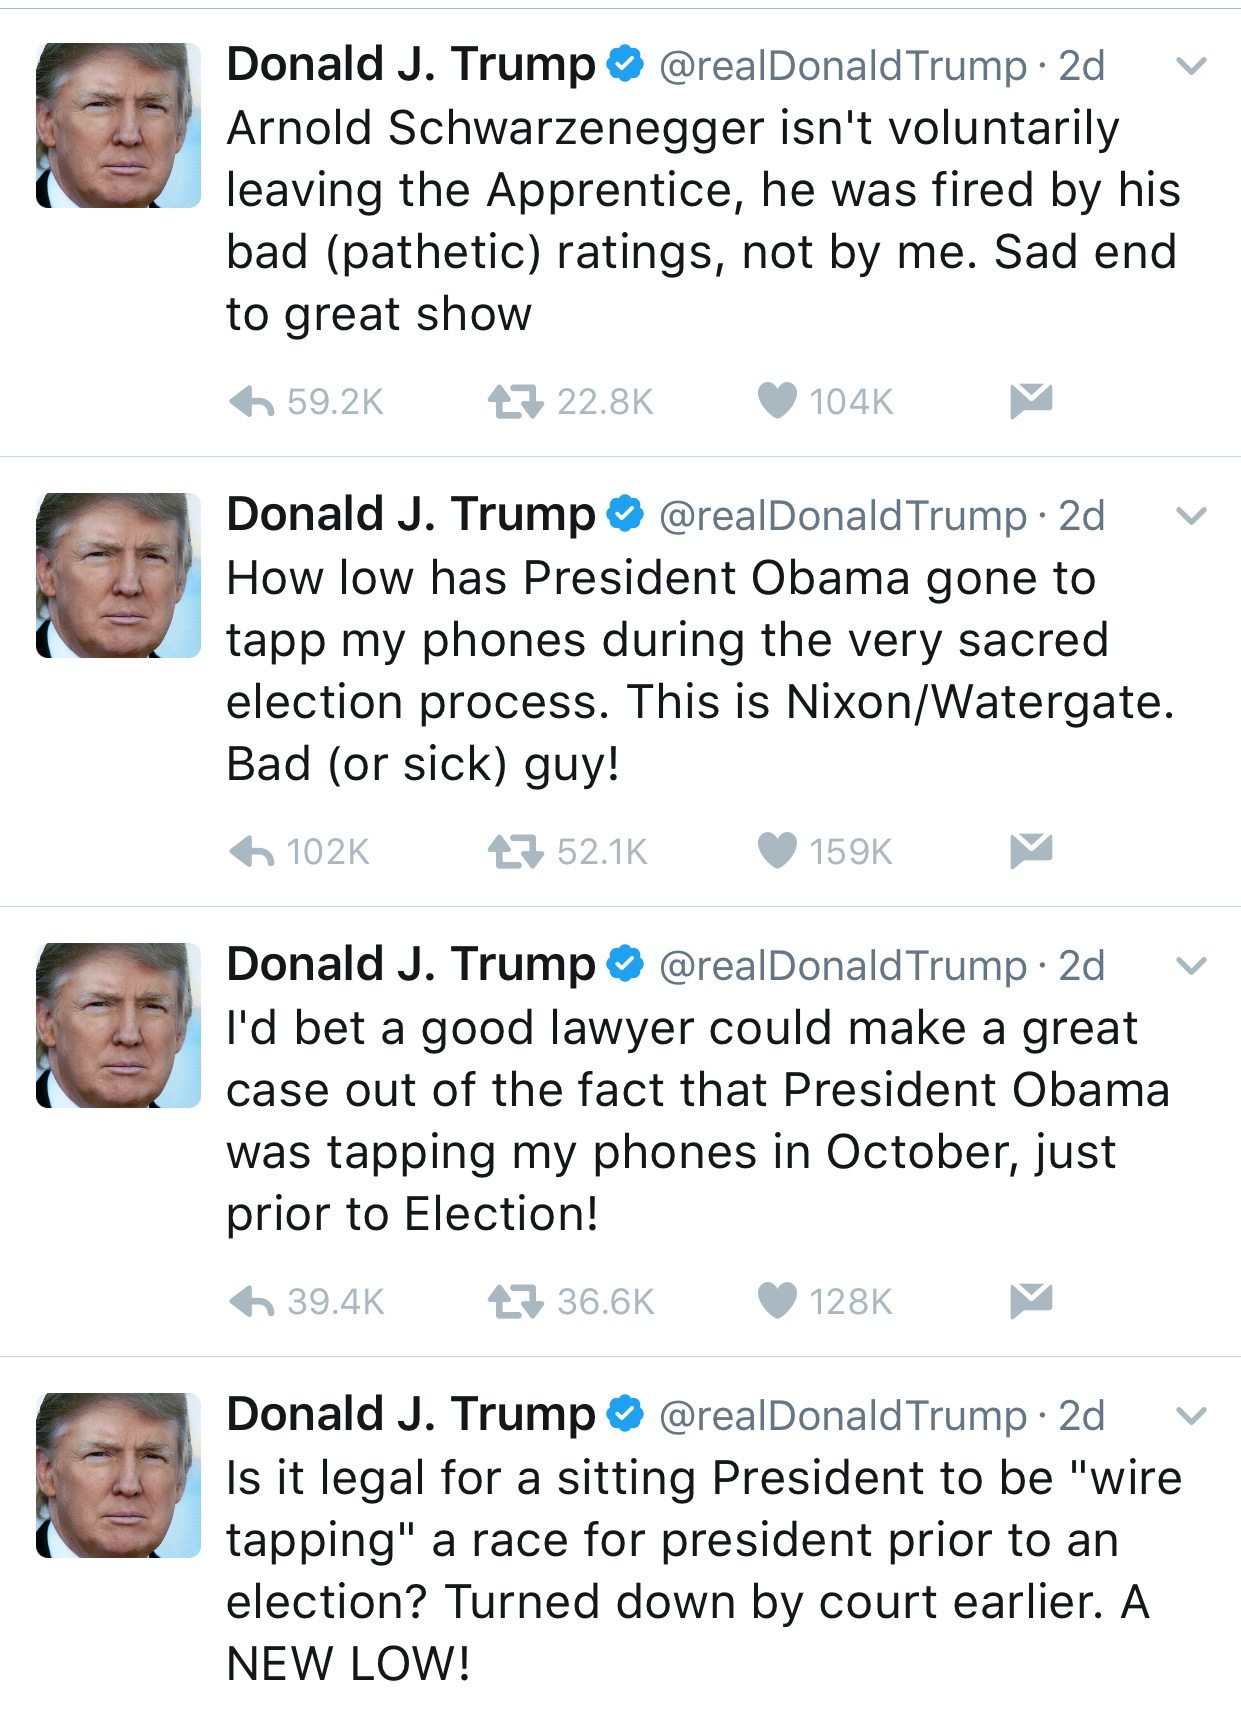 Image Trump tweets re Obama wire tap claims MAR4Trump tweets re Obama wire tap claims MAR4